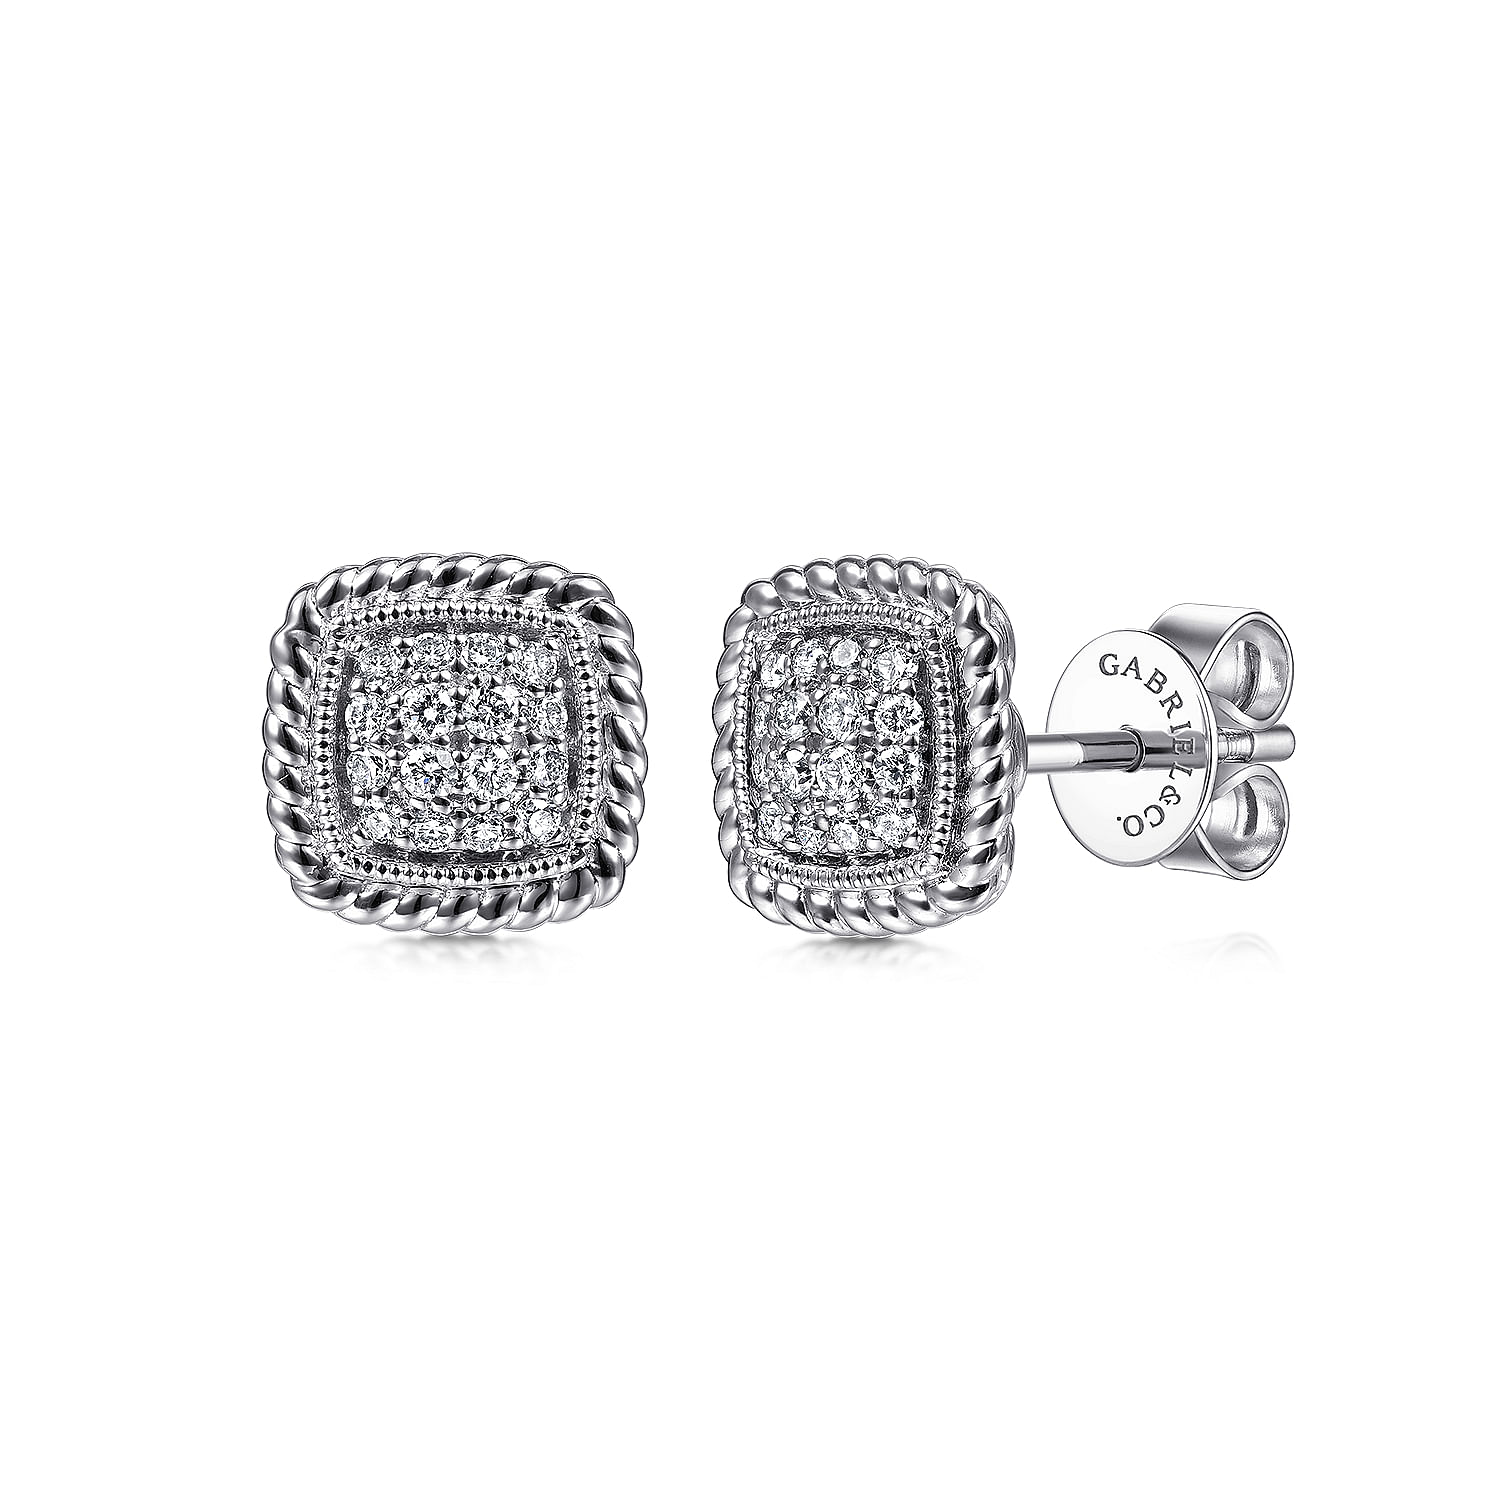 Gabriel - 14K White Gold Pavé Diamond Stud Earrings with Twisted Rope Frame 